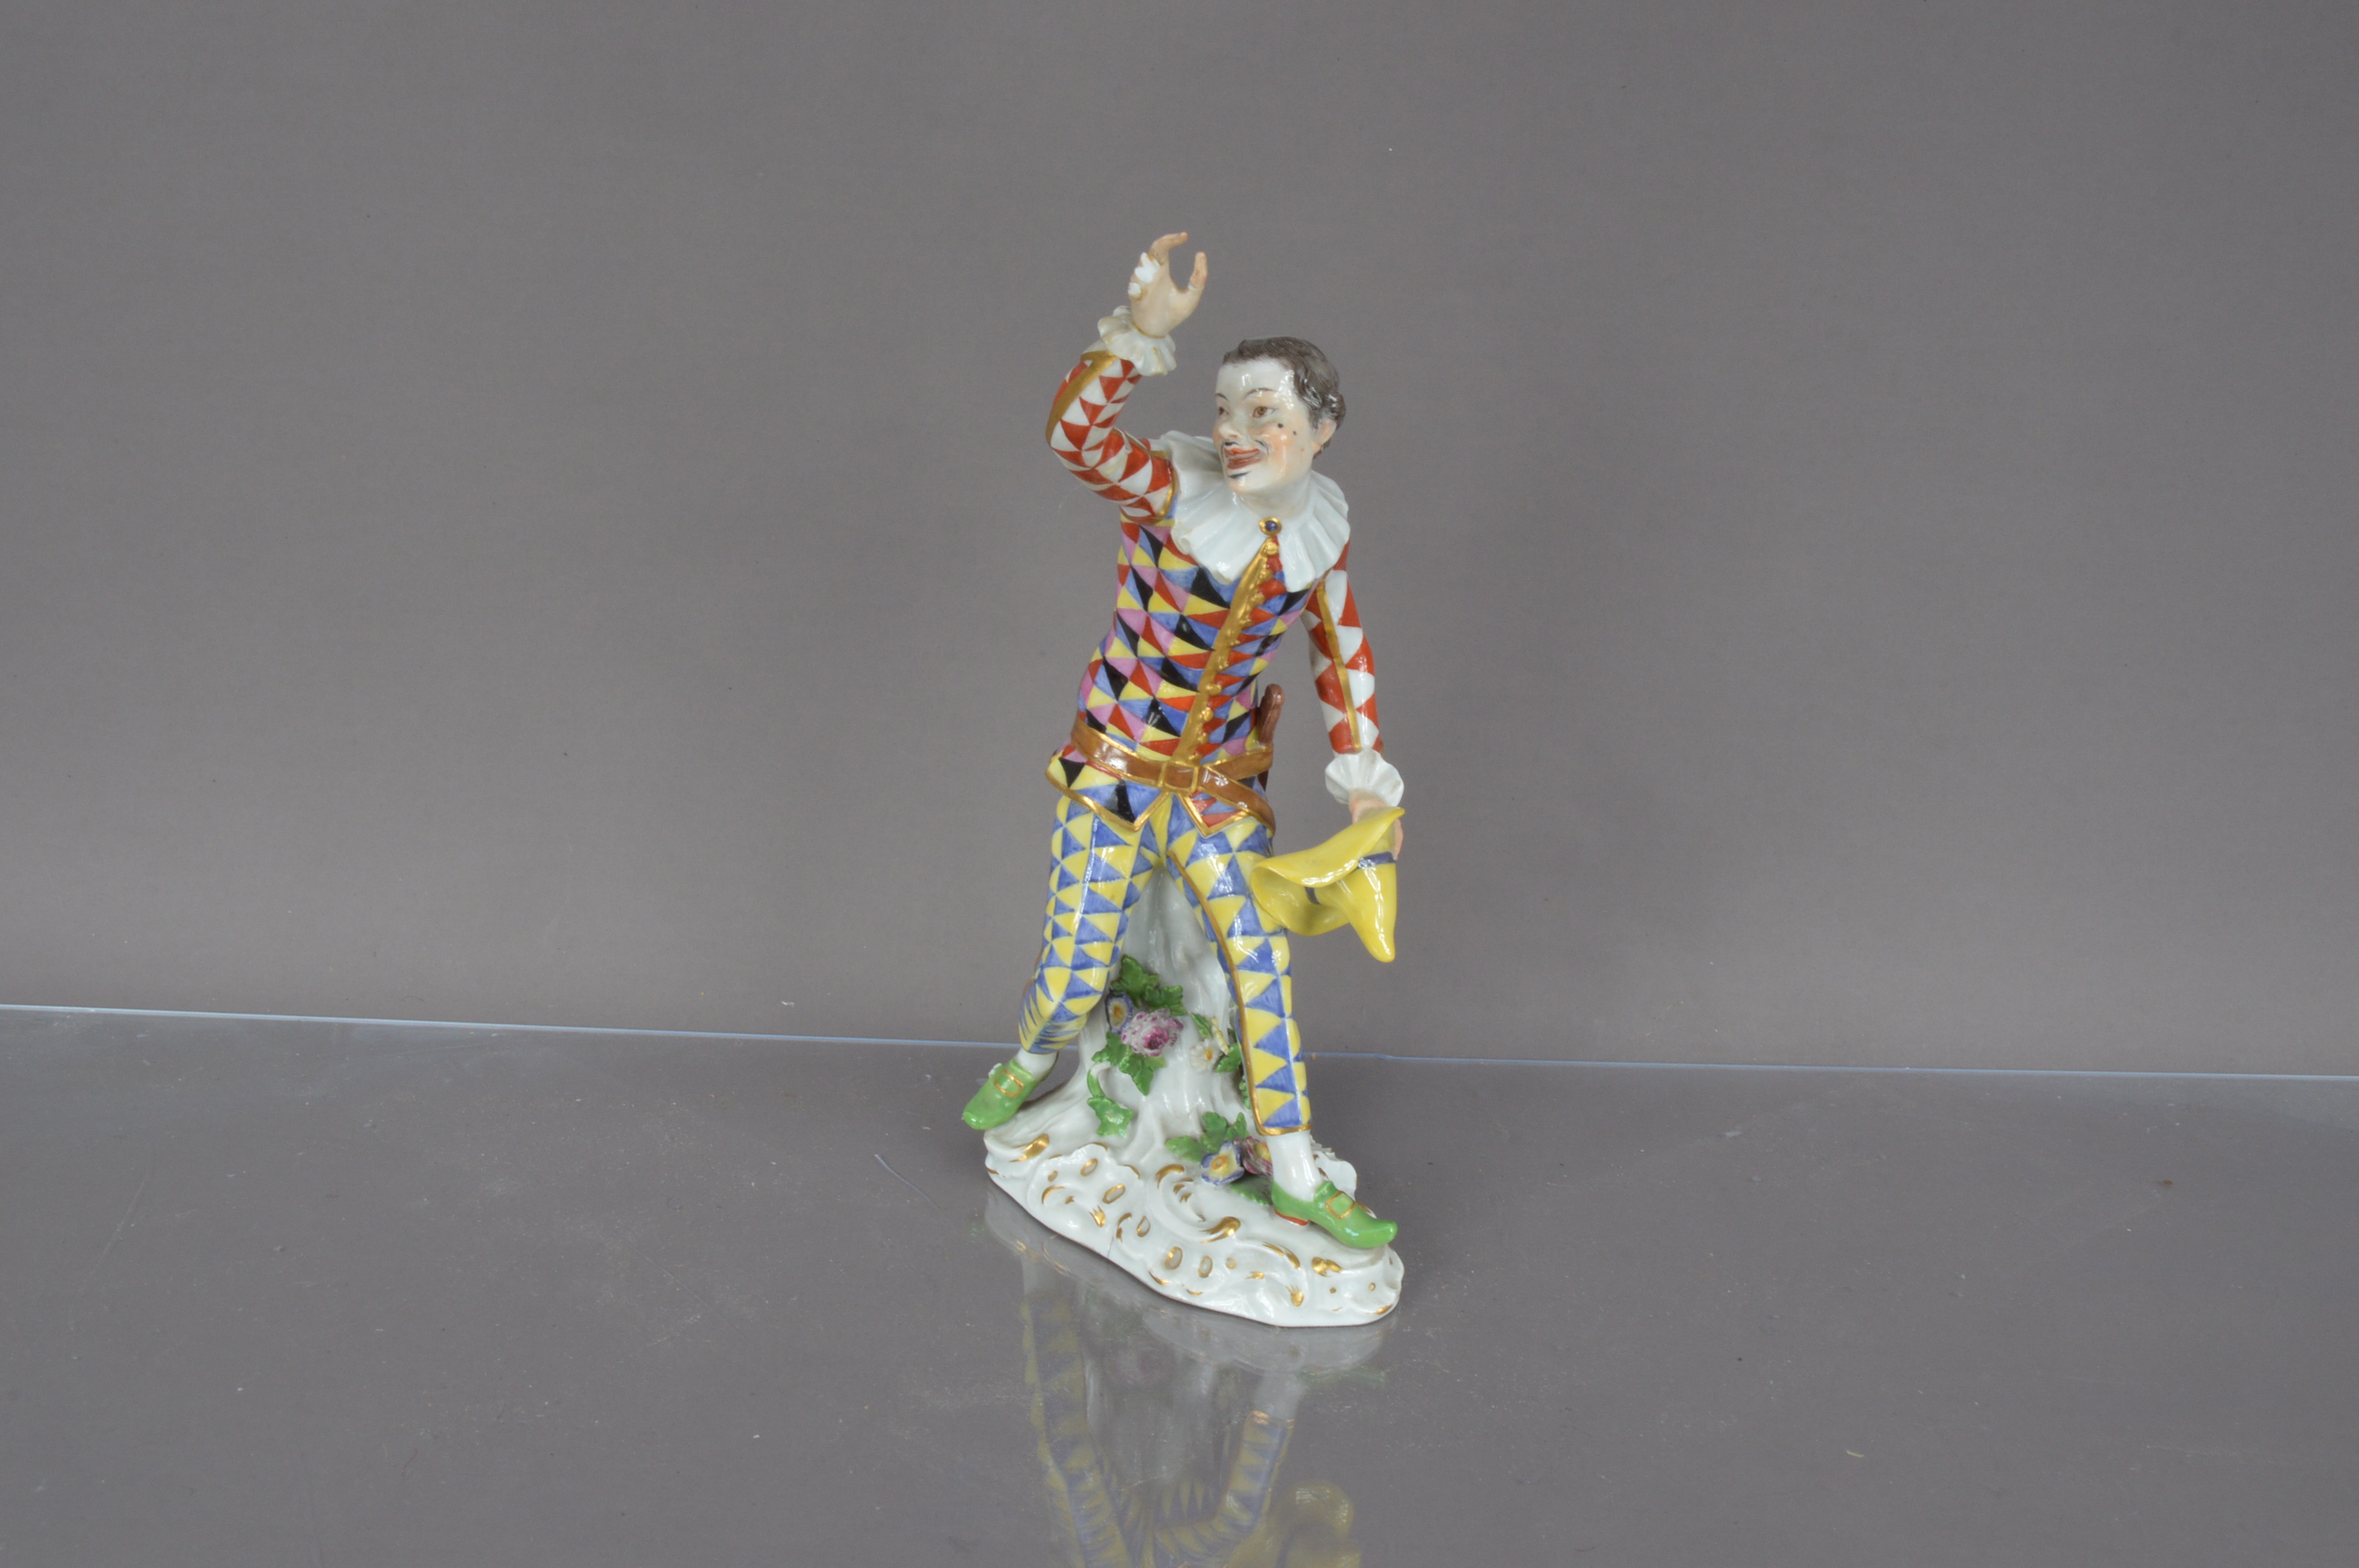 Lot 373 - An early 20th century Meissen porcelain figure of Harlequin